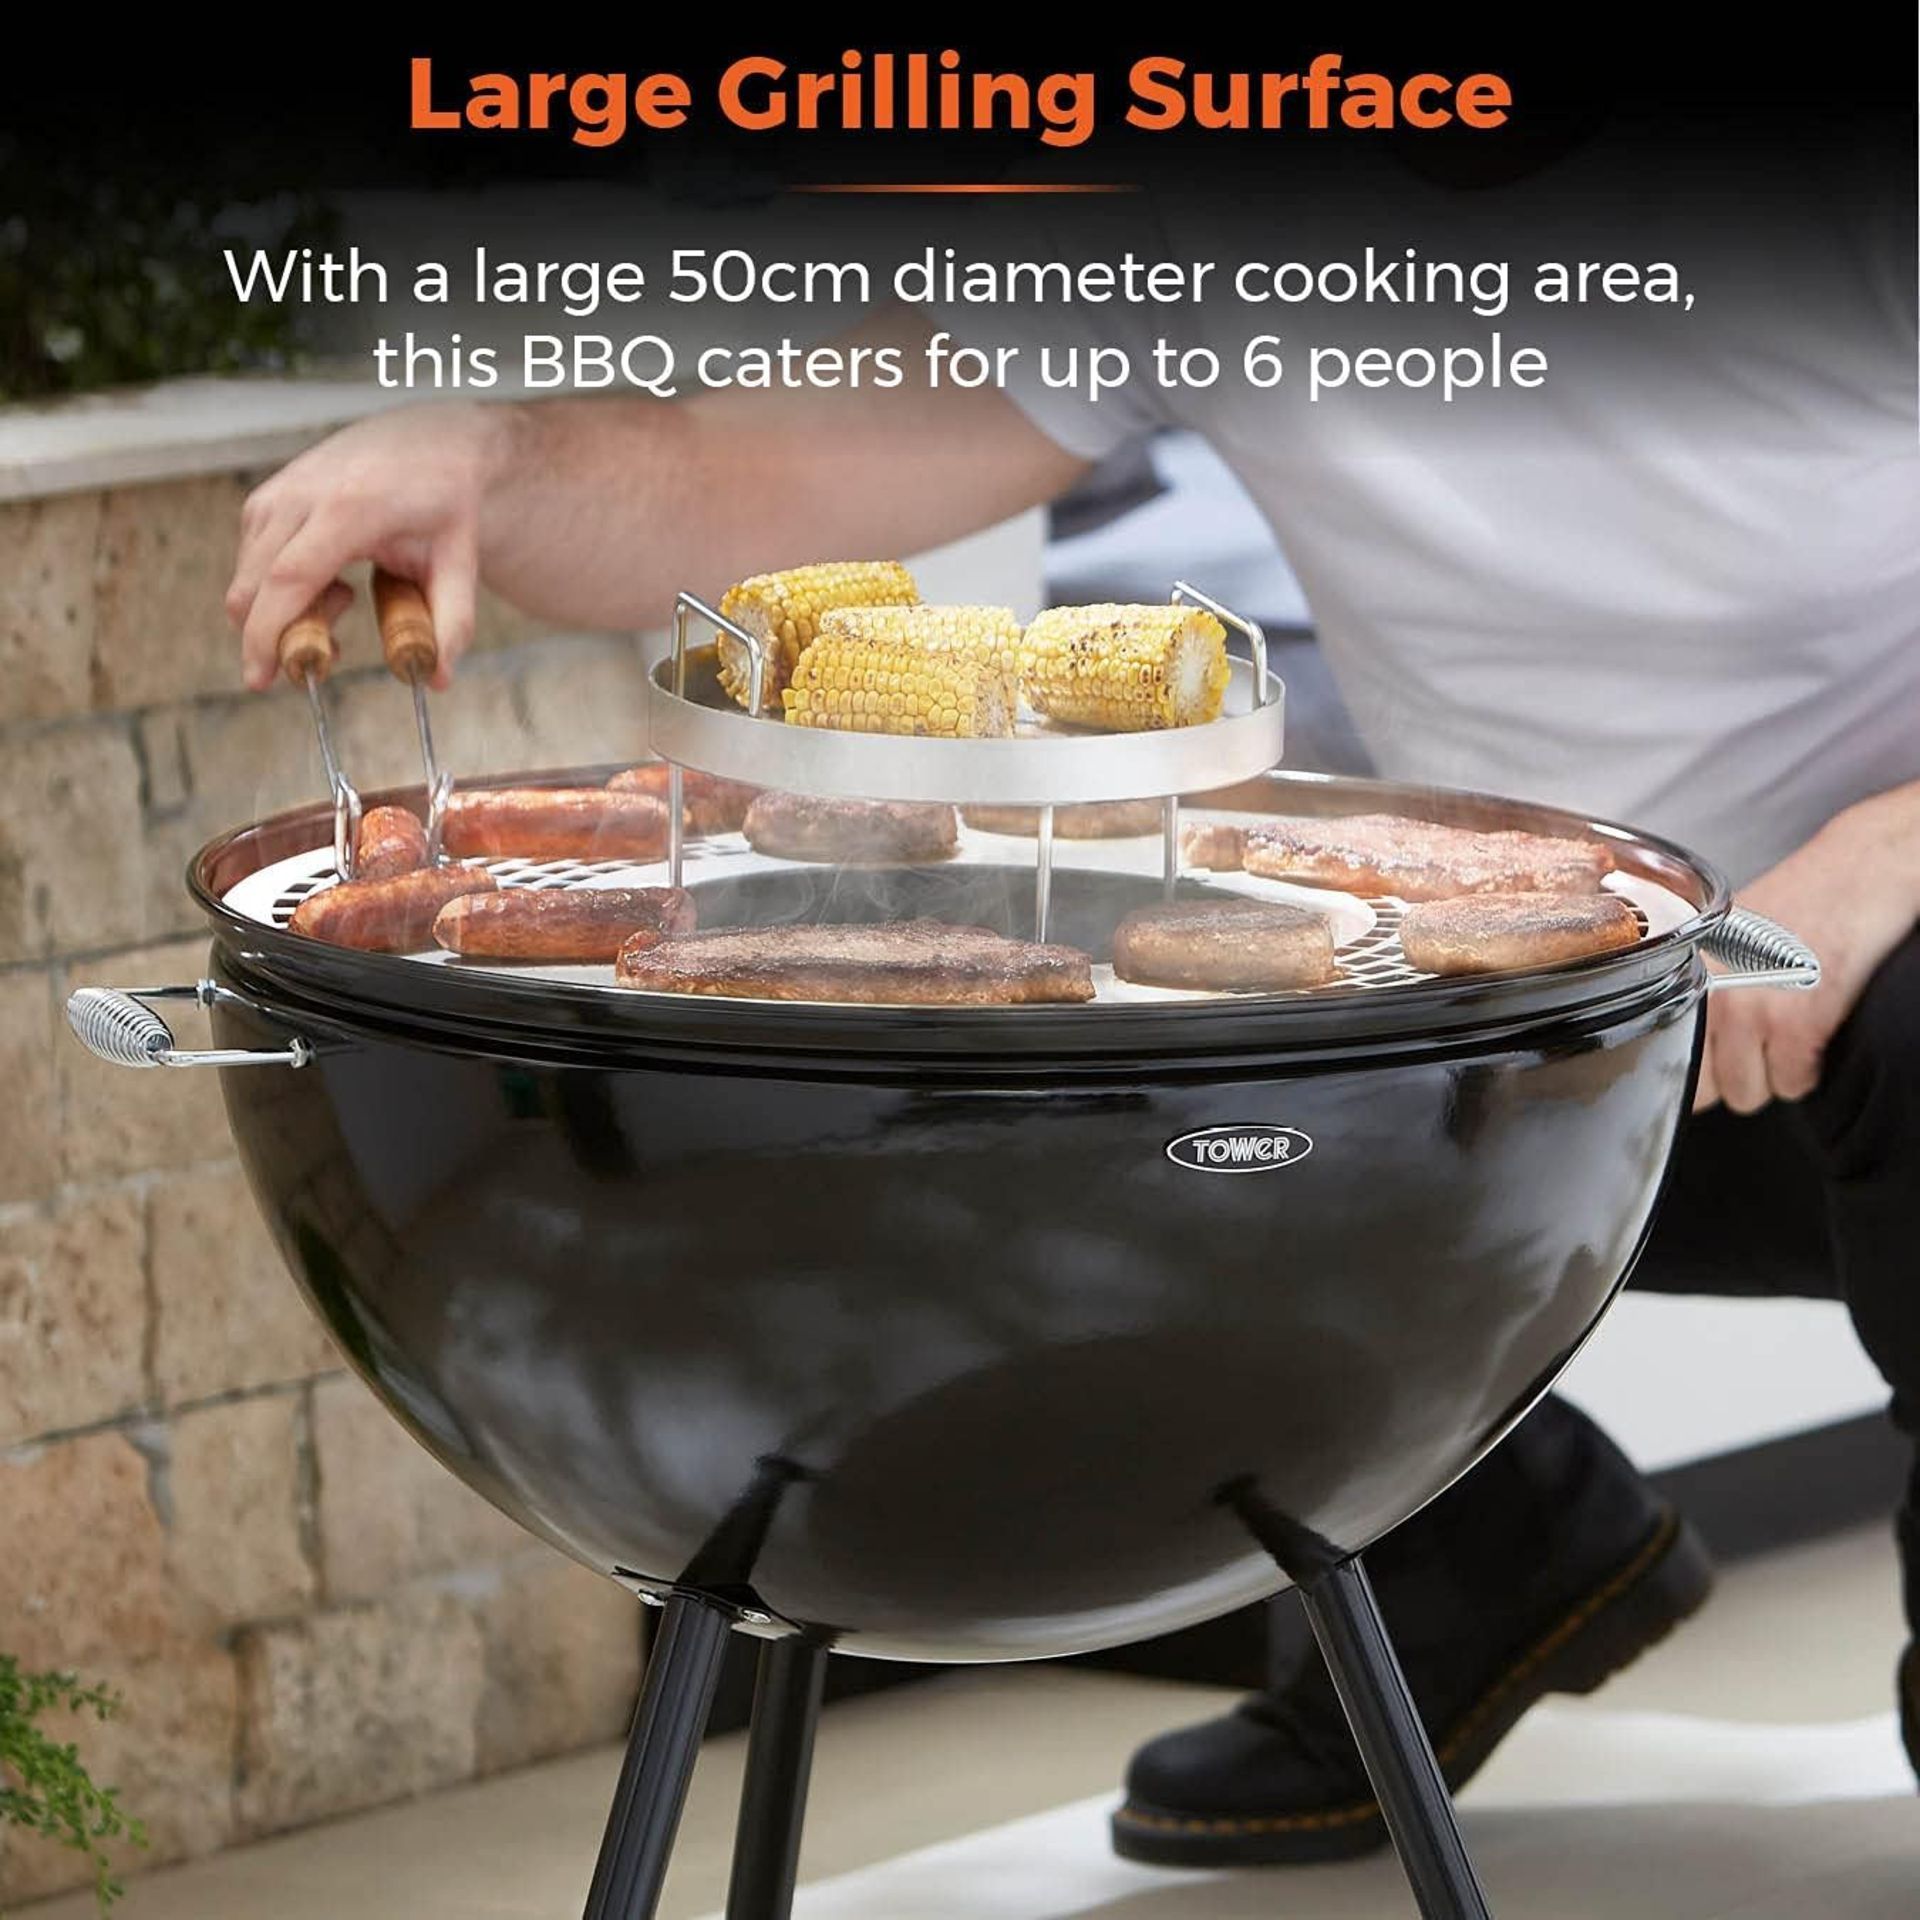 Brand New Tower Sphere Fire Pit and BBQ Grill, Black, DUAL USE â€“ This multi-functional pit n grill - Image 5 of 6